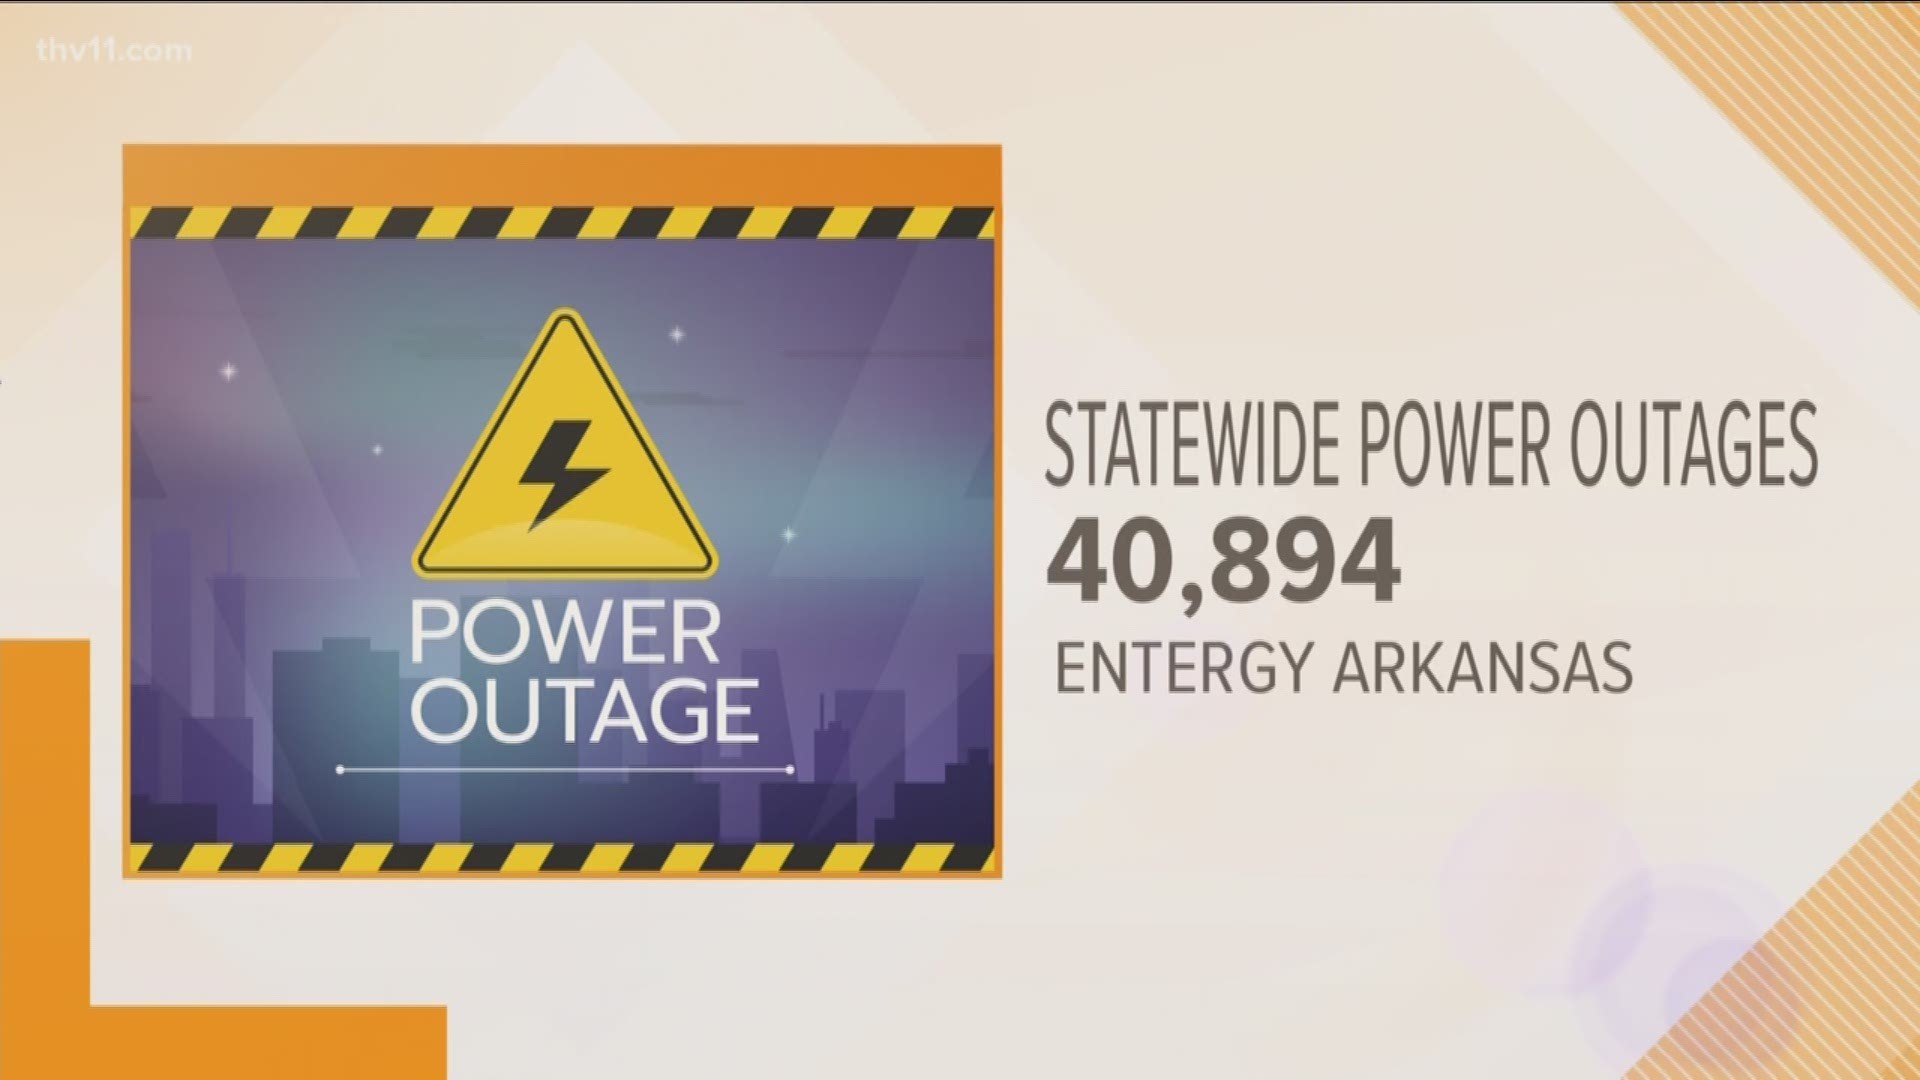 St. Francis, Chicot, Ashley, Pulaski, and Cross counties carry the bulk of power outages across the state